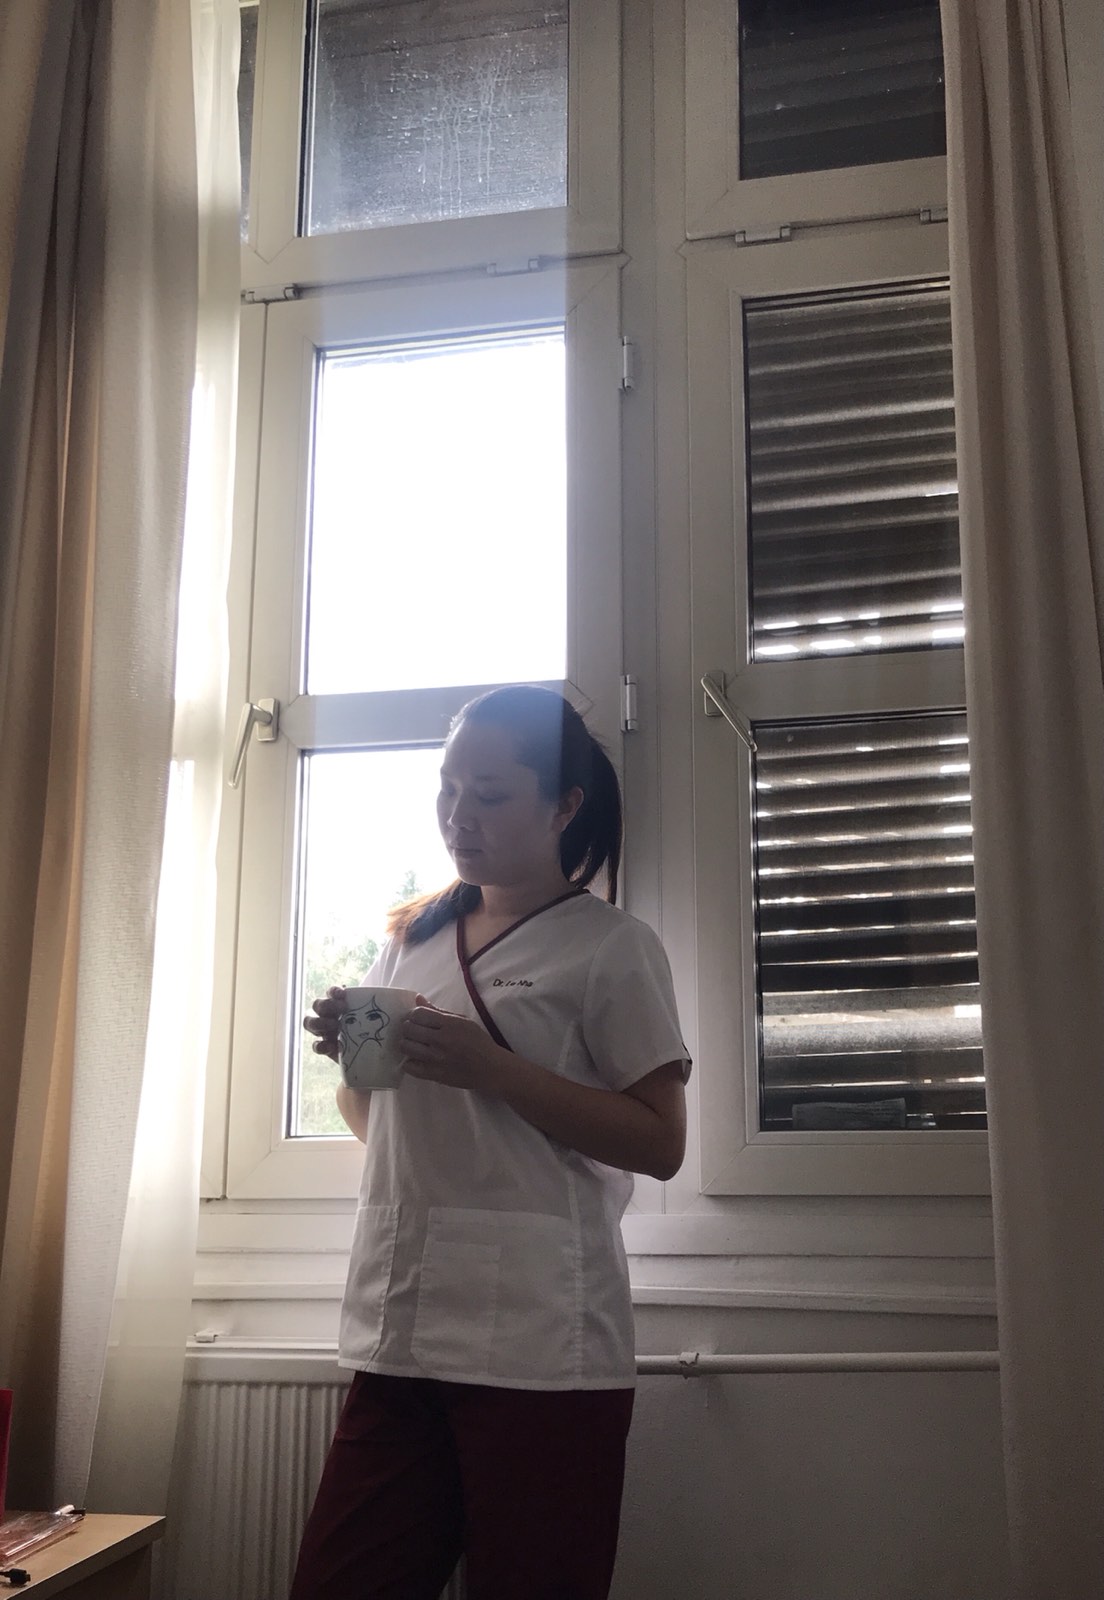 Doctor Hoa Nha on the morning she got the news of her father-in-law’s death. One of her coworkers took the photo without knowing her intense emotion that morning. Photo supplied.